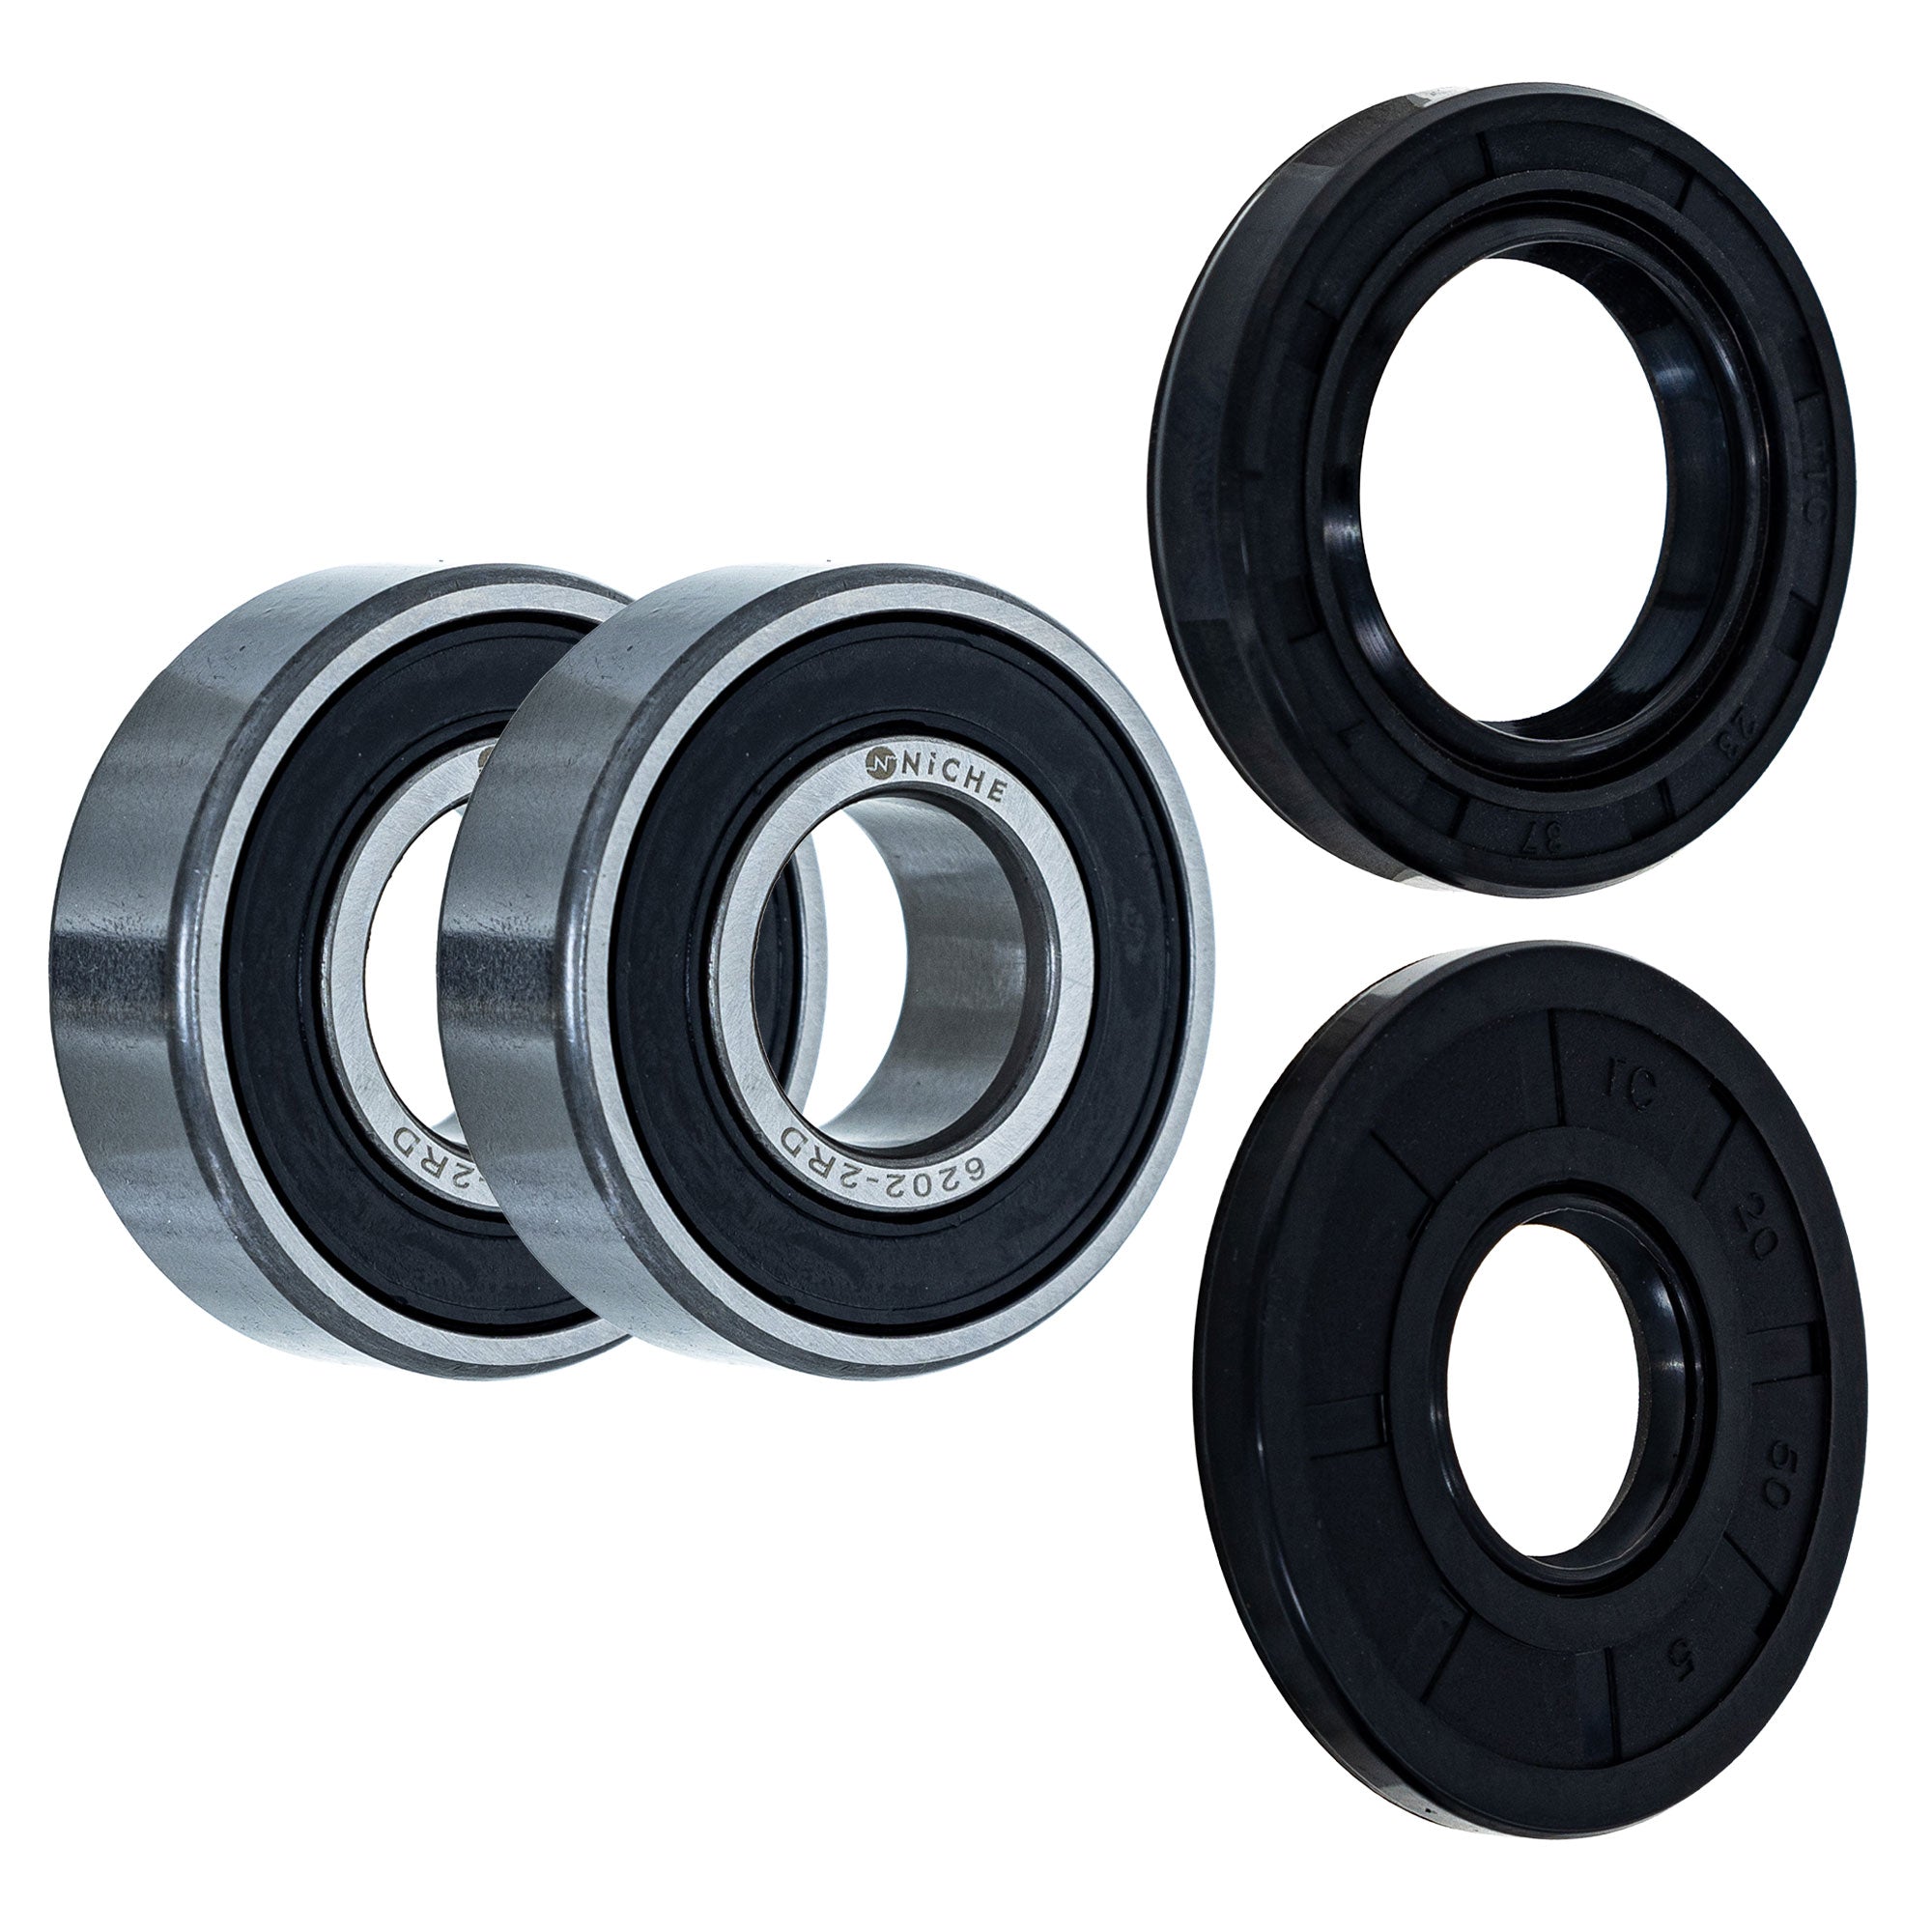 Wheel Bearing Seal Kit for zOTHER CR250R CR125R NICHE MK1008959